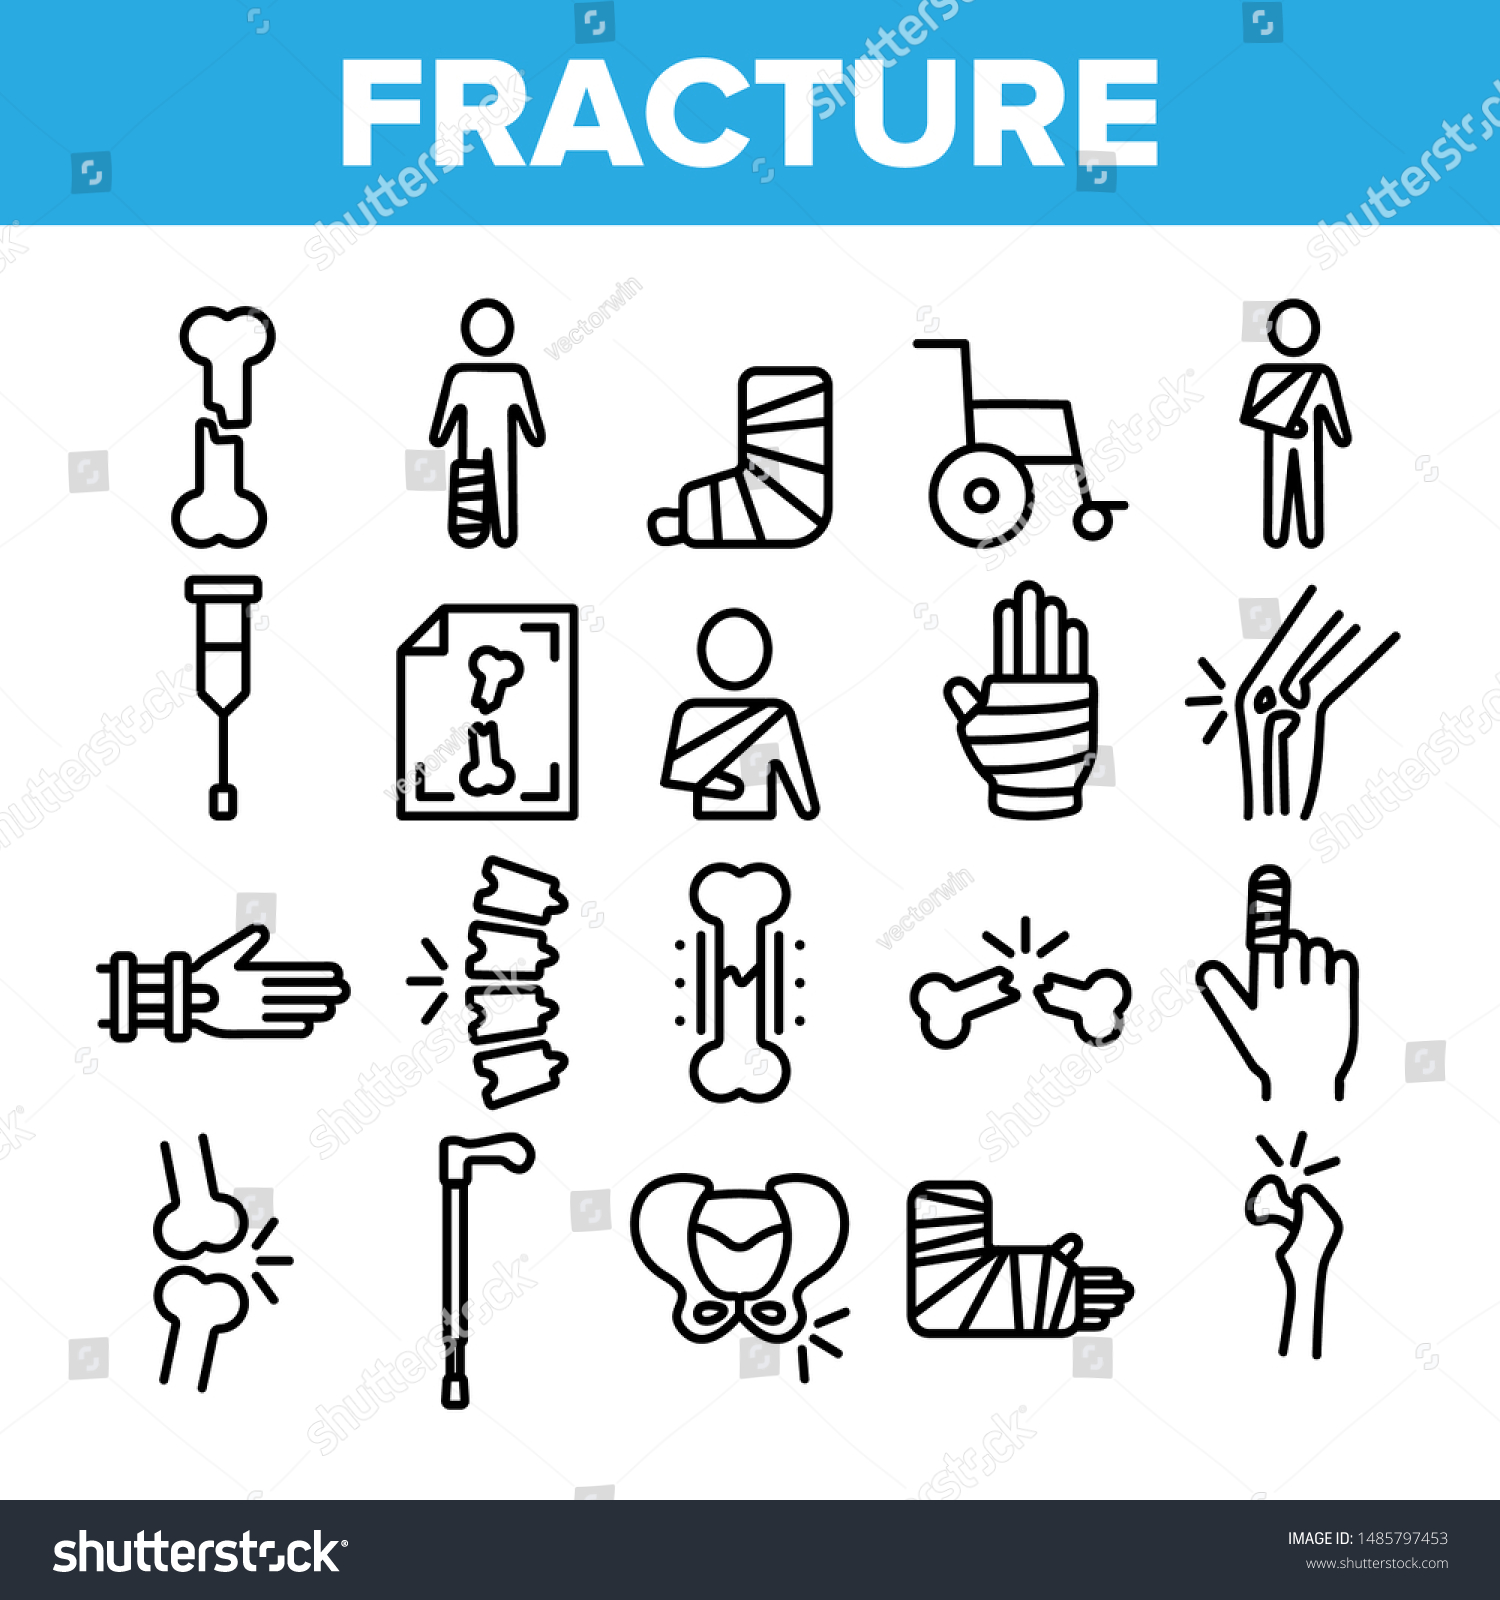 SVG of Collection Fracture Elements Vector Sign Icons Set Thin Line. Gypsum Foot And Hand Arm Crutch, Bones Fracture Linear Pictograms. Medicine Details And Character Monochrome Contour Illustrations svg